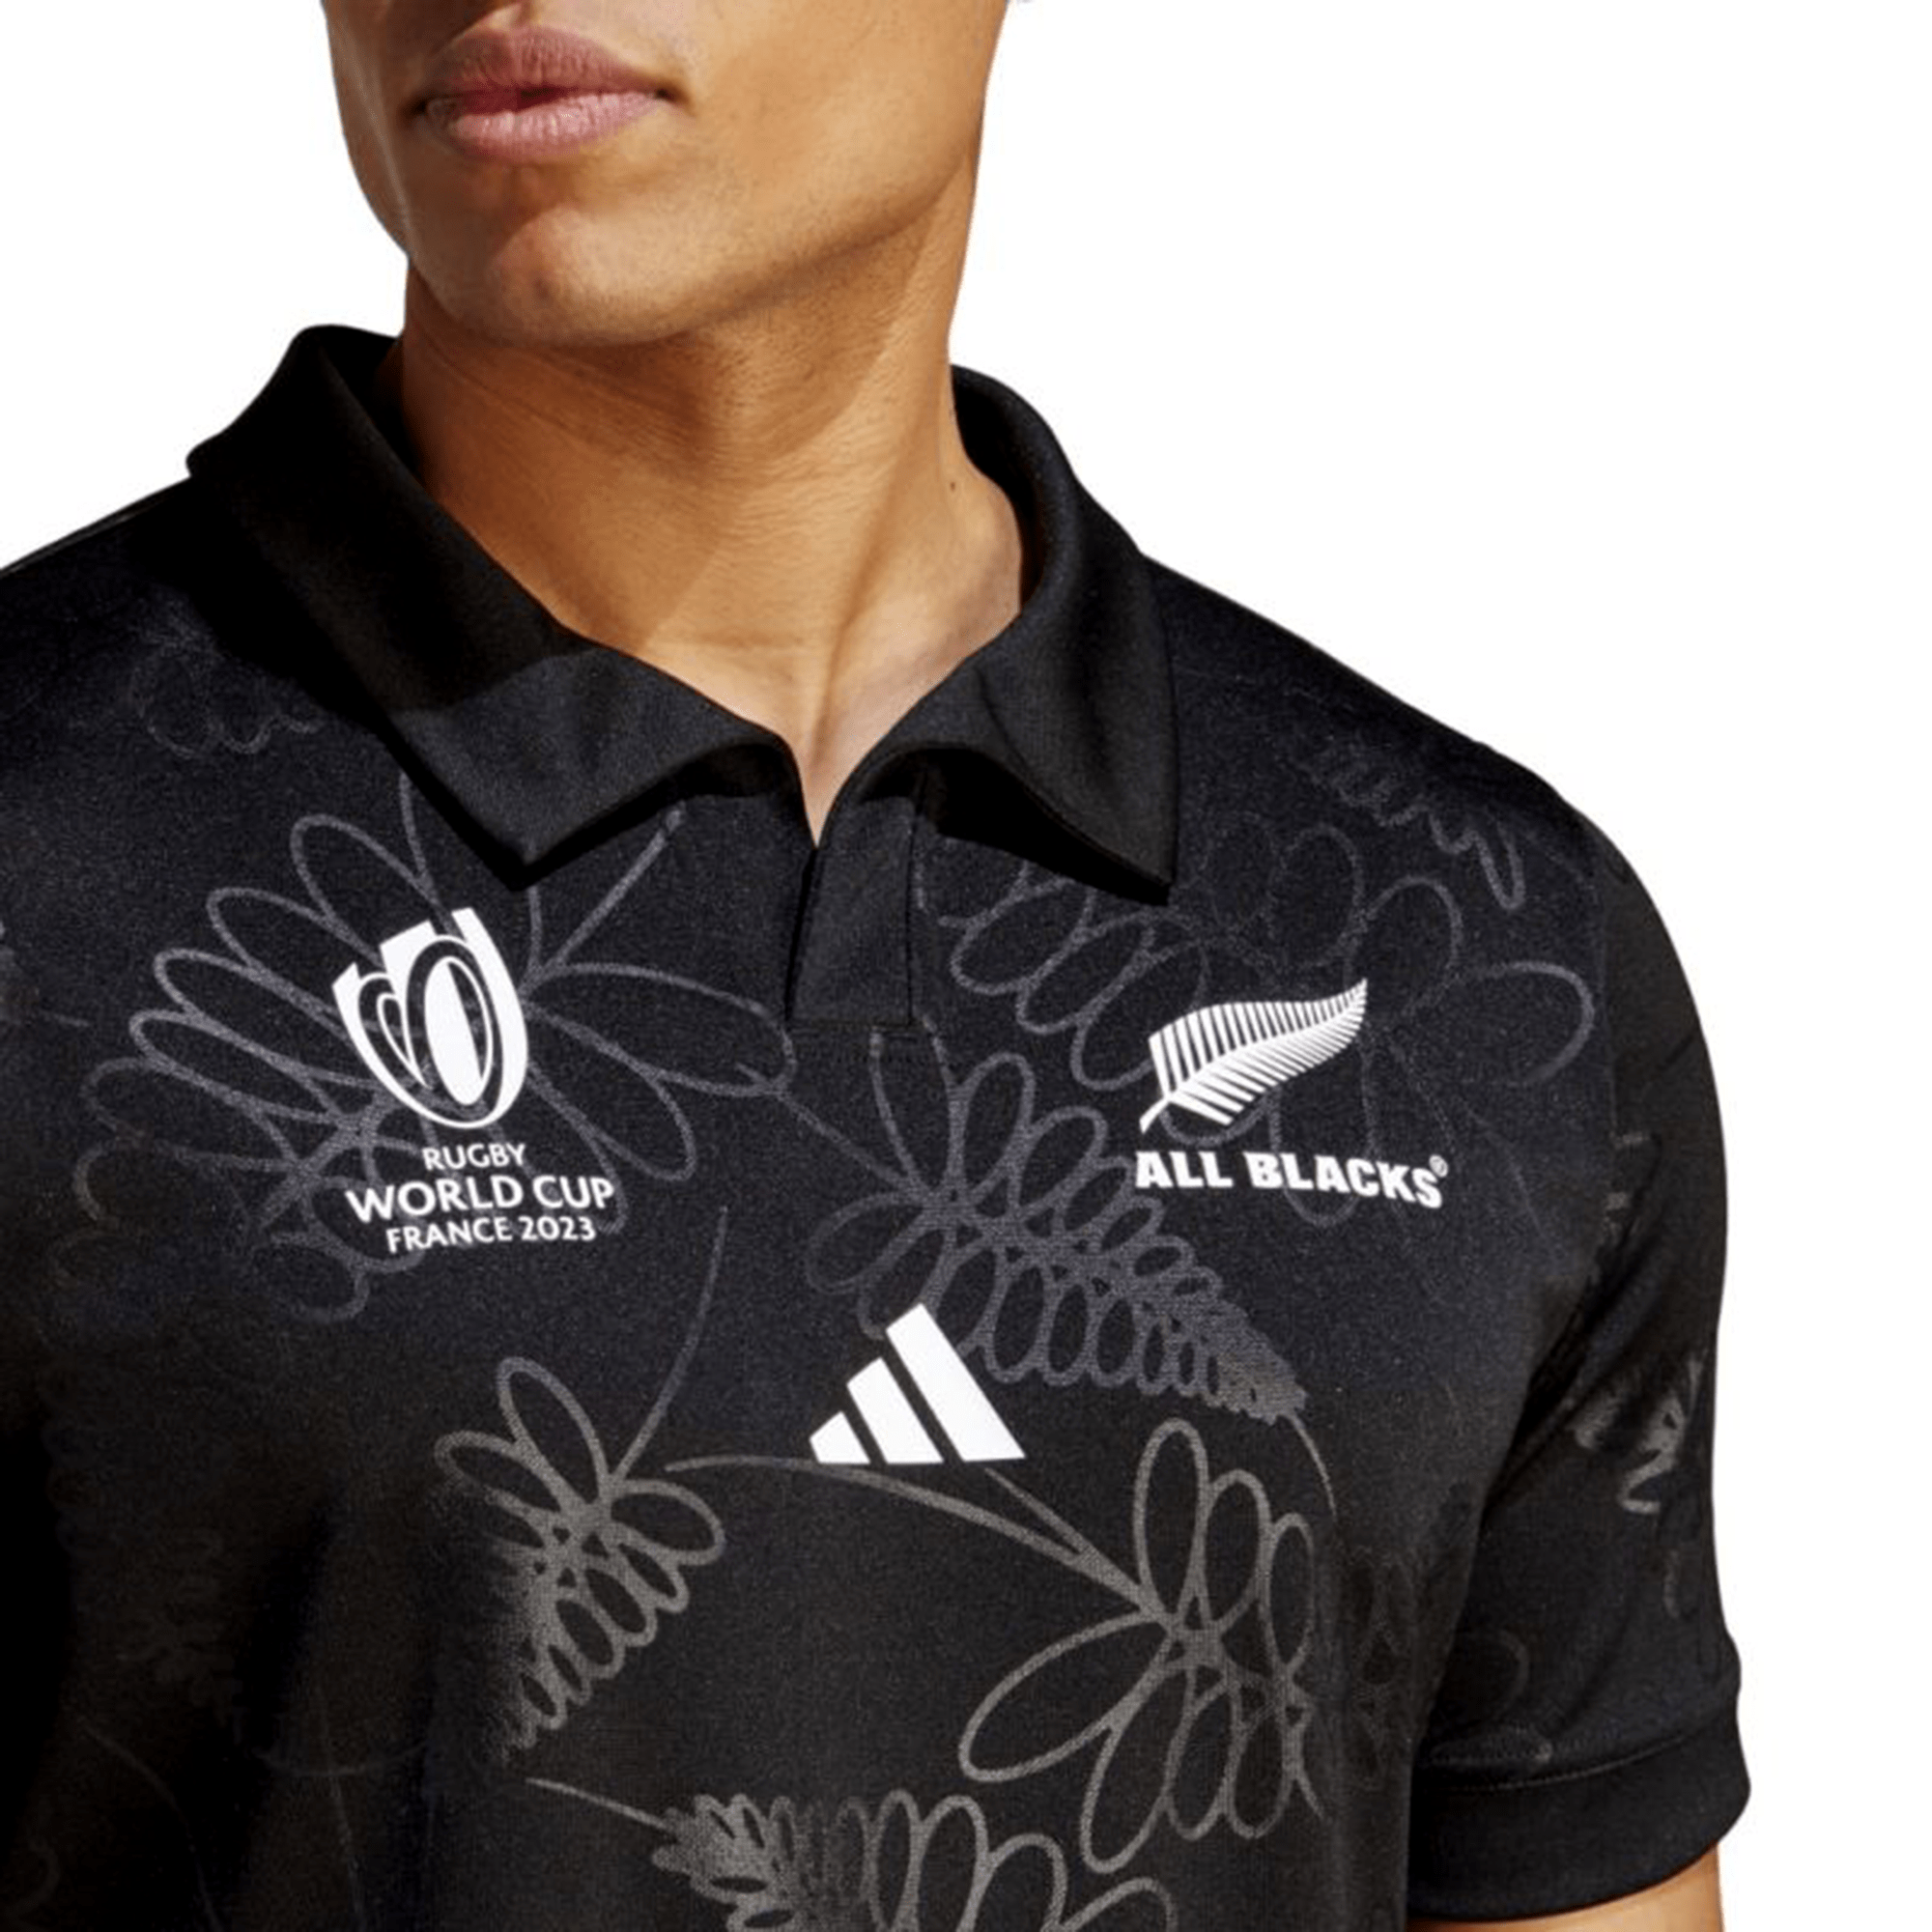 New Zealand vintage of 2015, the greatest rugby team of all time, New  Zealand rugby union team